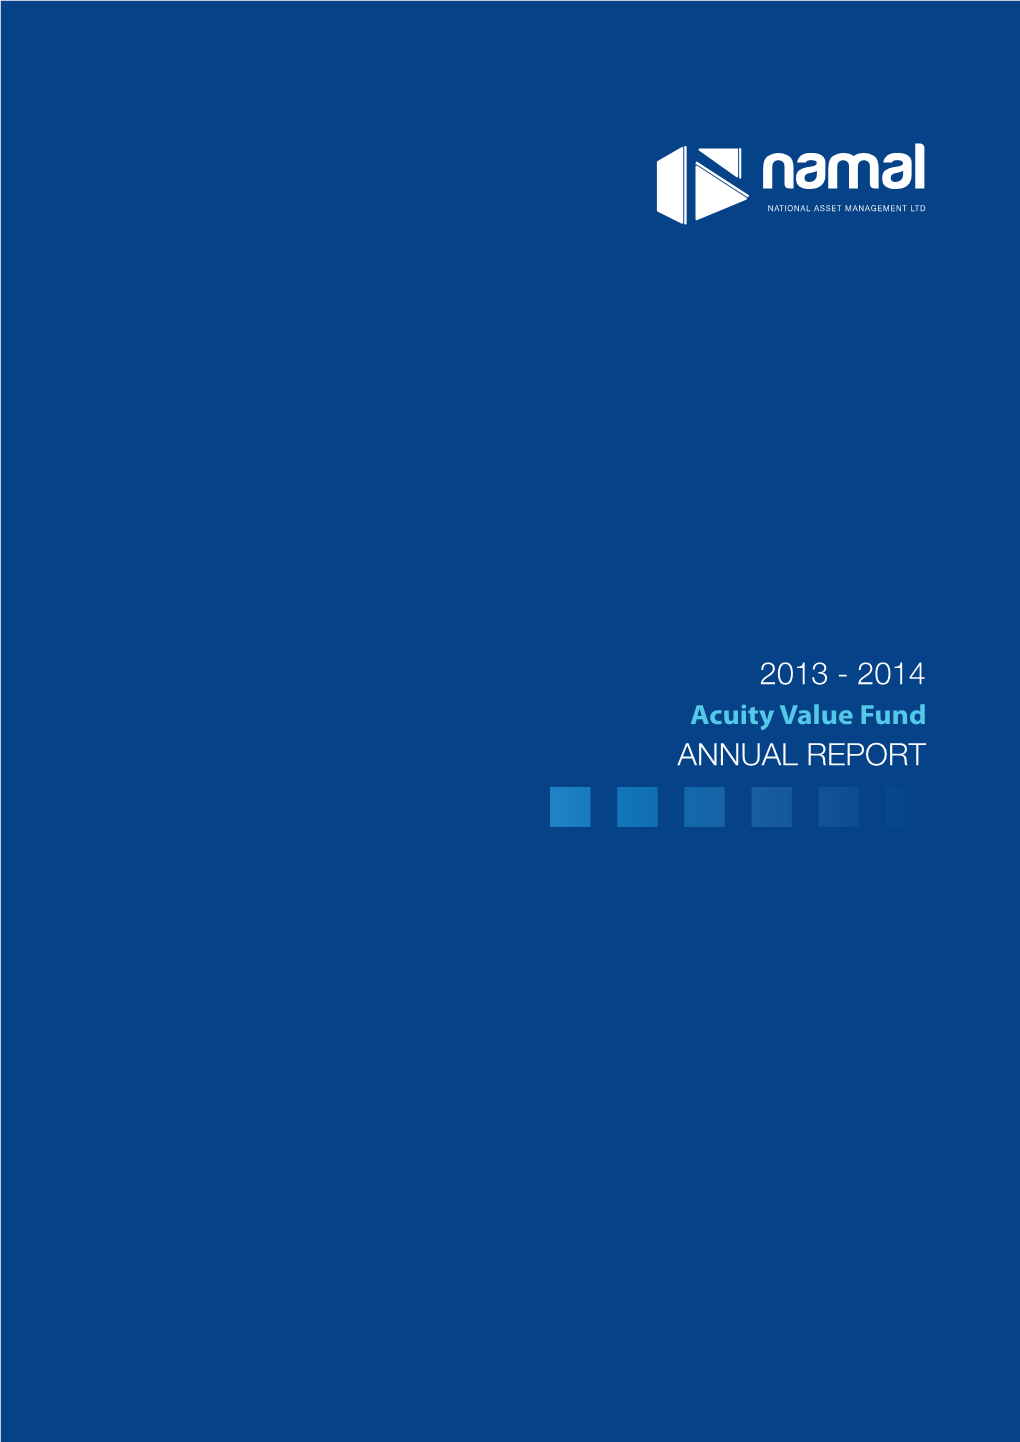 Acuity Value Fund Annual Report